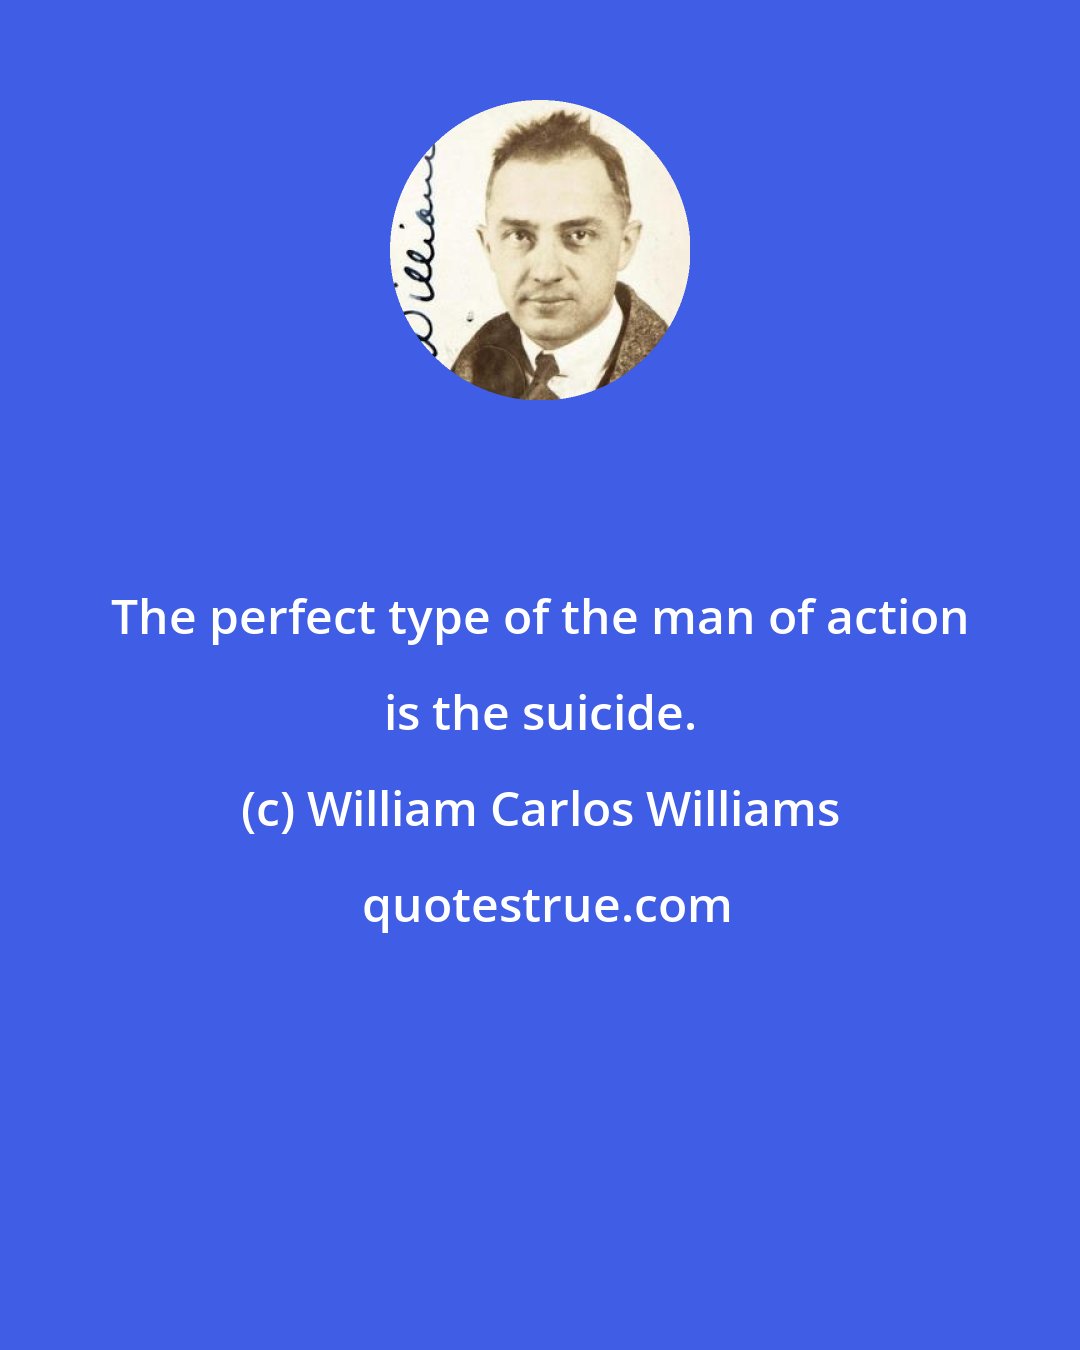 William Carlos Williams: The perfect type of the man of action is the suicide.